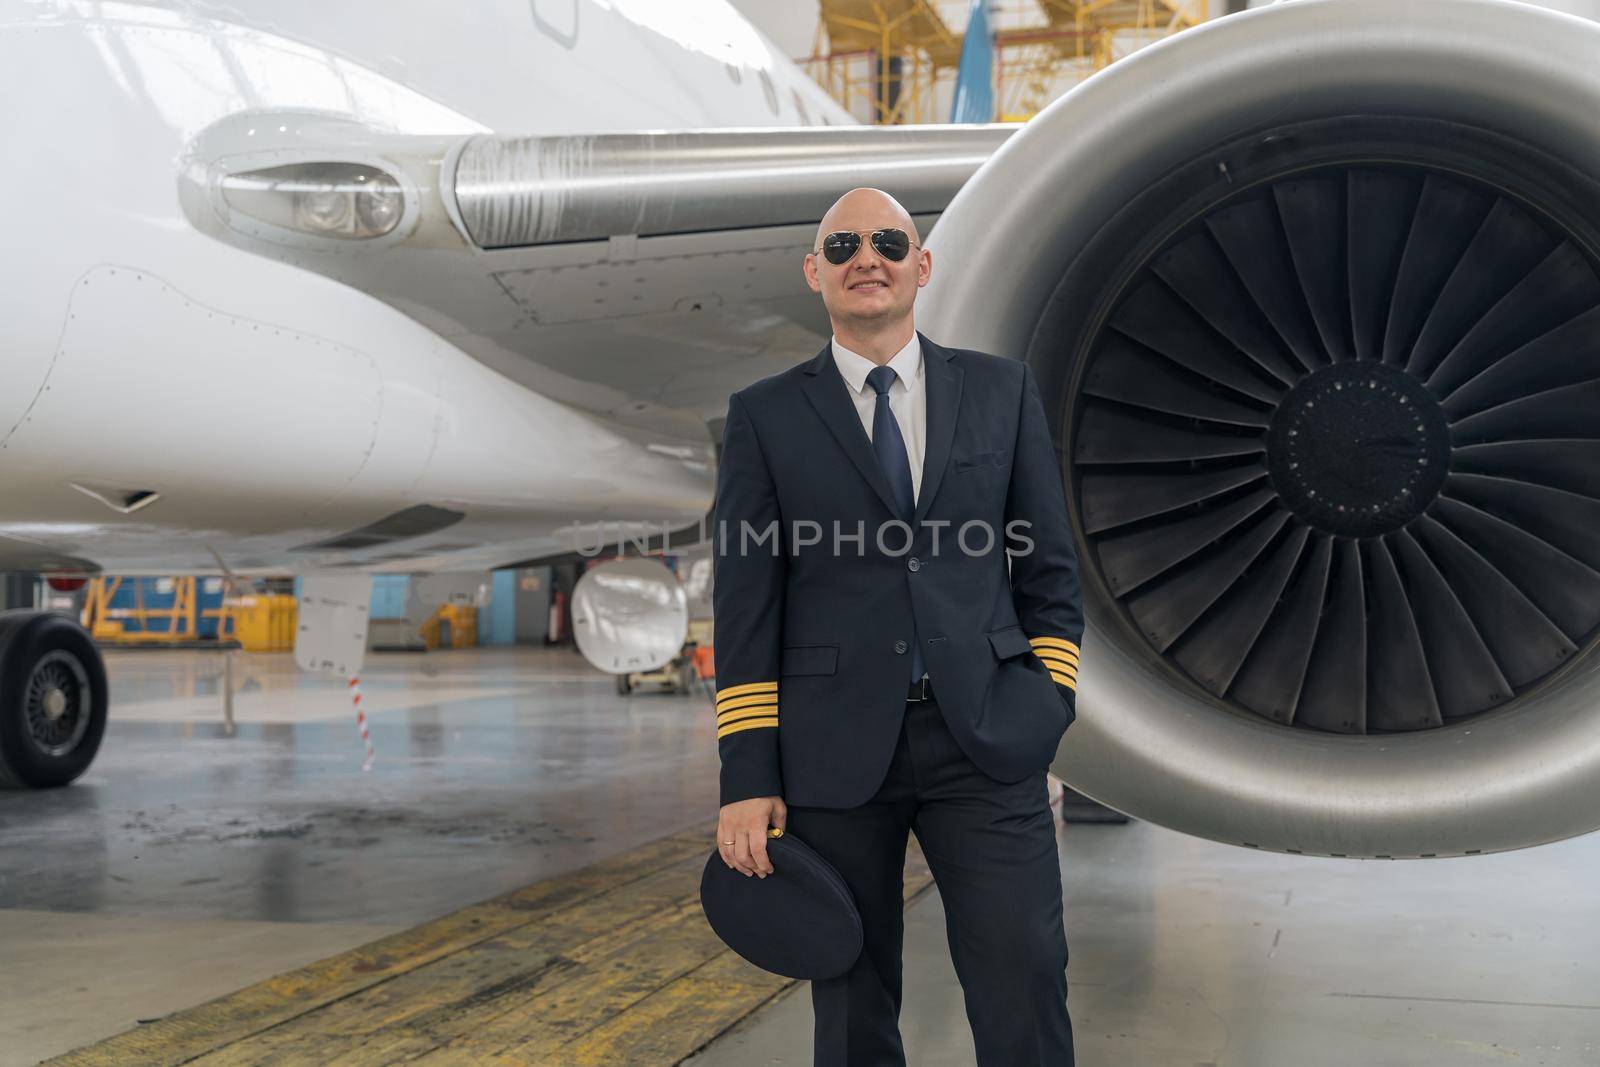 Pilot in black suit posing near the turbine wing of an airplane by Yaroslav_astakhov